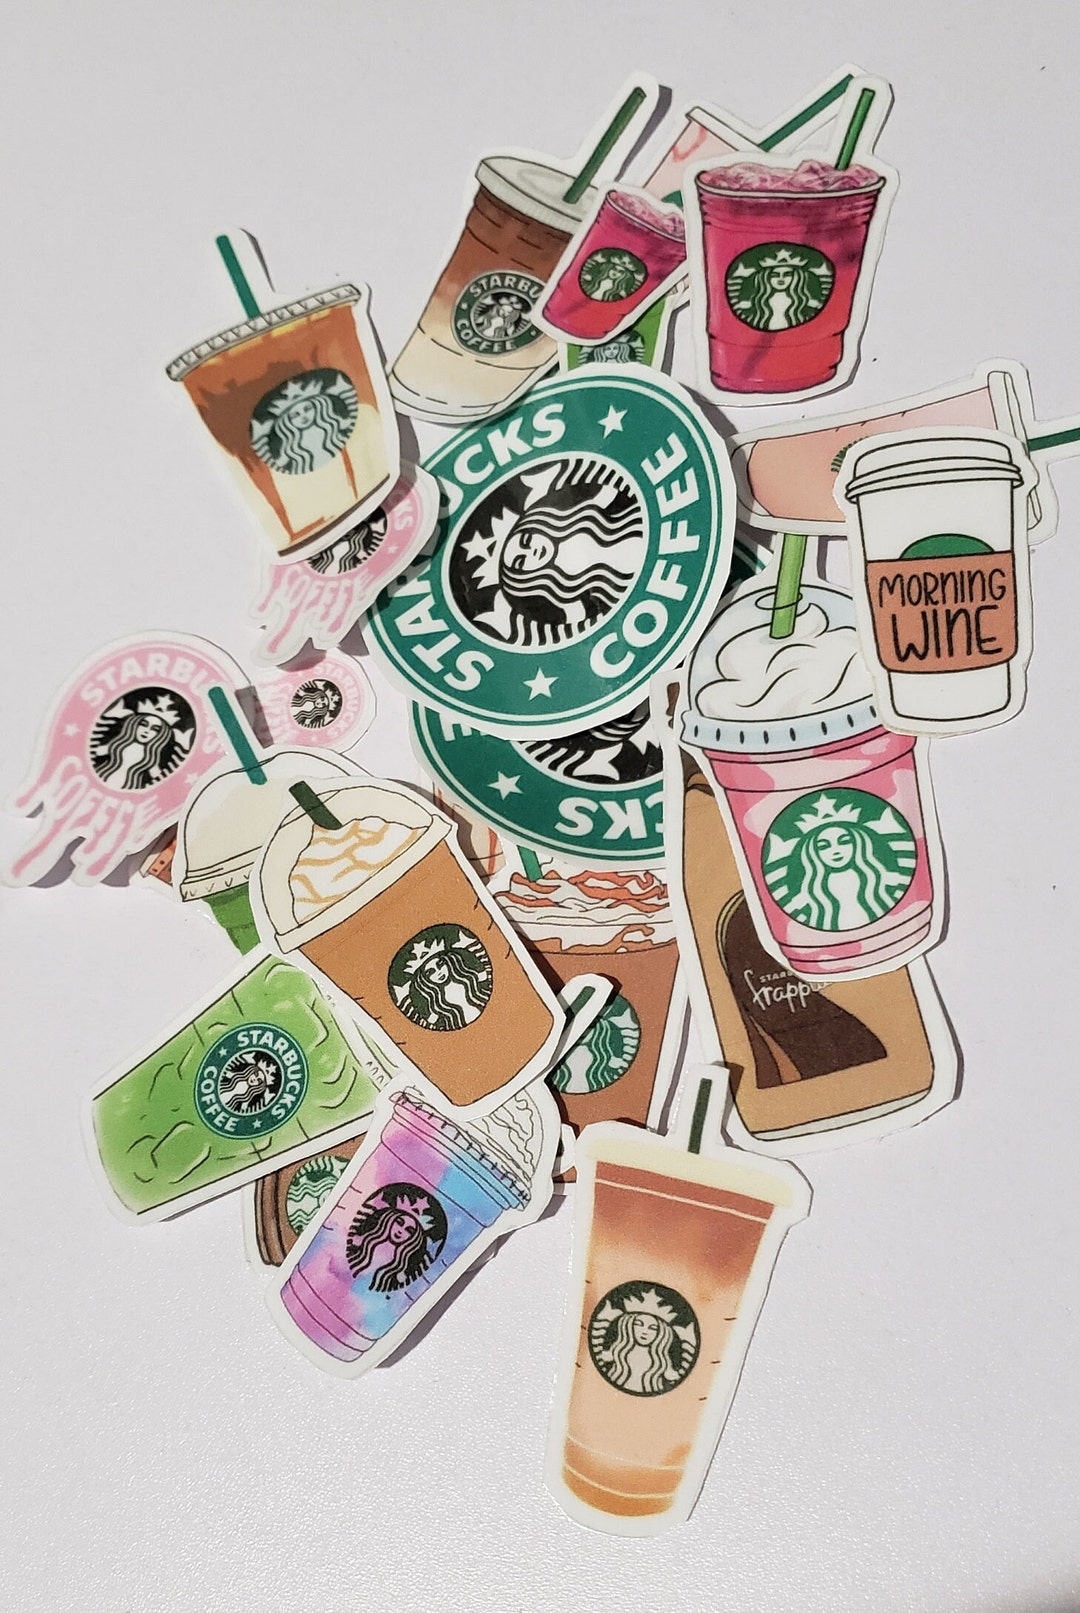 Starbucks Inspired Coffee Cup Planner Stickers BD013 – Bella Rose Paper Co